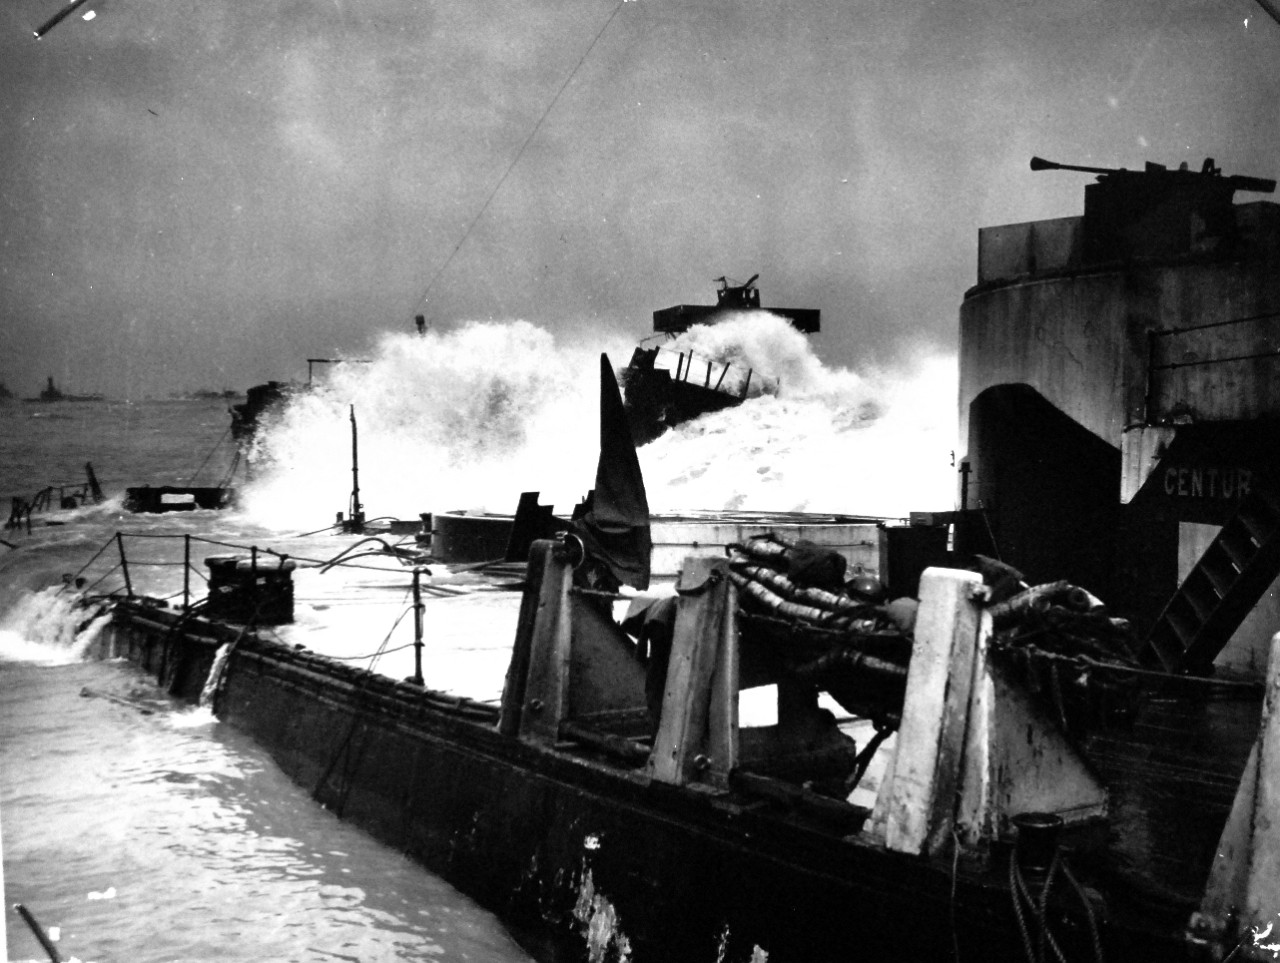 26-G-2963: Normandy Invasion, Mulberries, June 1944.  Violent Storm Battered Normandy Breakwater of Sunken Freighters during Invasion Landings.  Reducing the violence of a storm that blew in upon Normandy invasion operations soon after D-Day, a breakwater of sunken freighters shielded Allied landings and cut down the toll of destruction.  Coast Guard officers, thoroughly briefed in their job, helped direct the planned sinking of 23 ships to form a breakwater.   Photographed from a Coast Guard LCI (L) shows a mountainous wave spending its fury against the bulwark, June 1944.  Official U.S. Coast Guard Photograph, now in the collections of the National Archives.   (2015/5/19).  